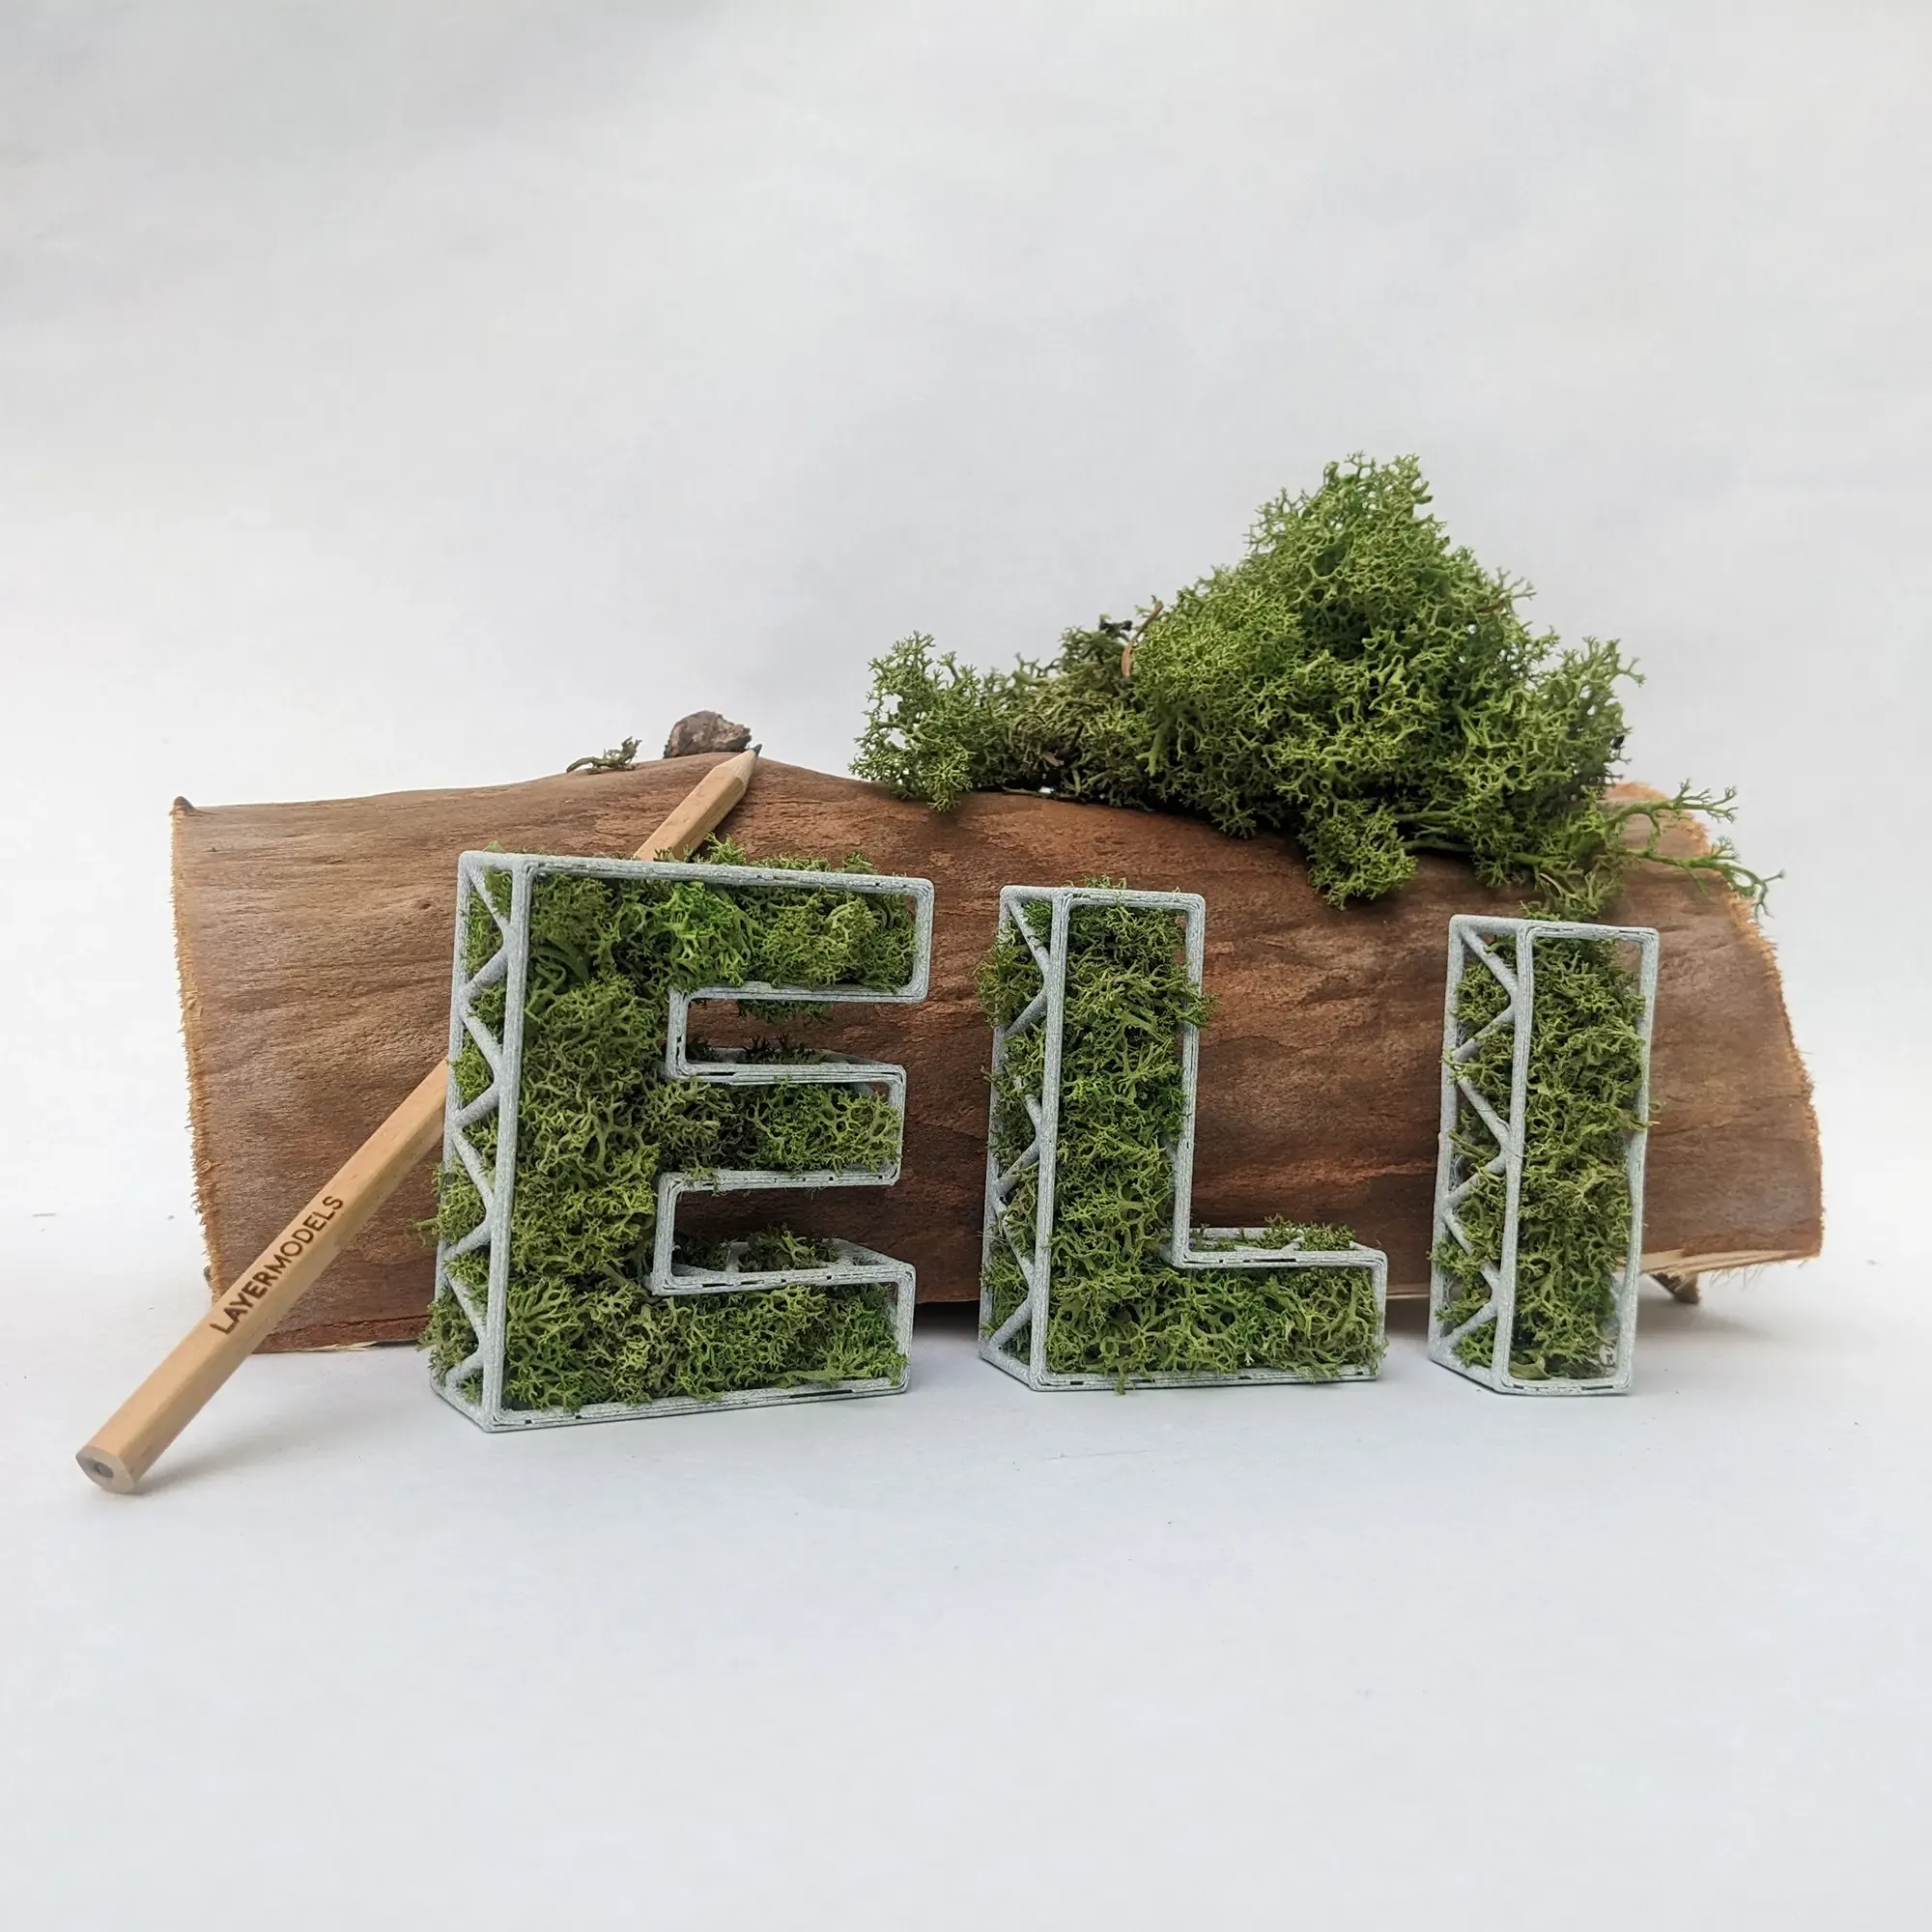 MOSS LETTERS FOR NAMES